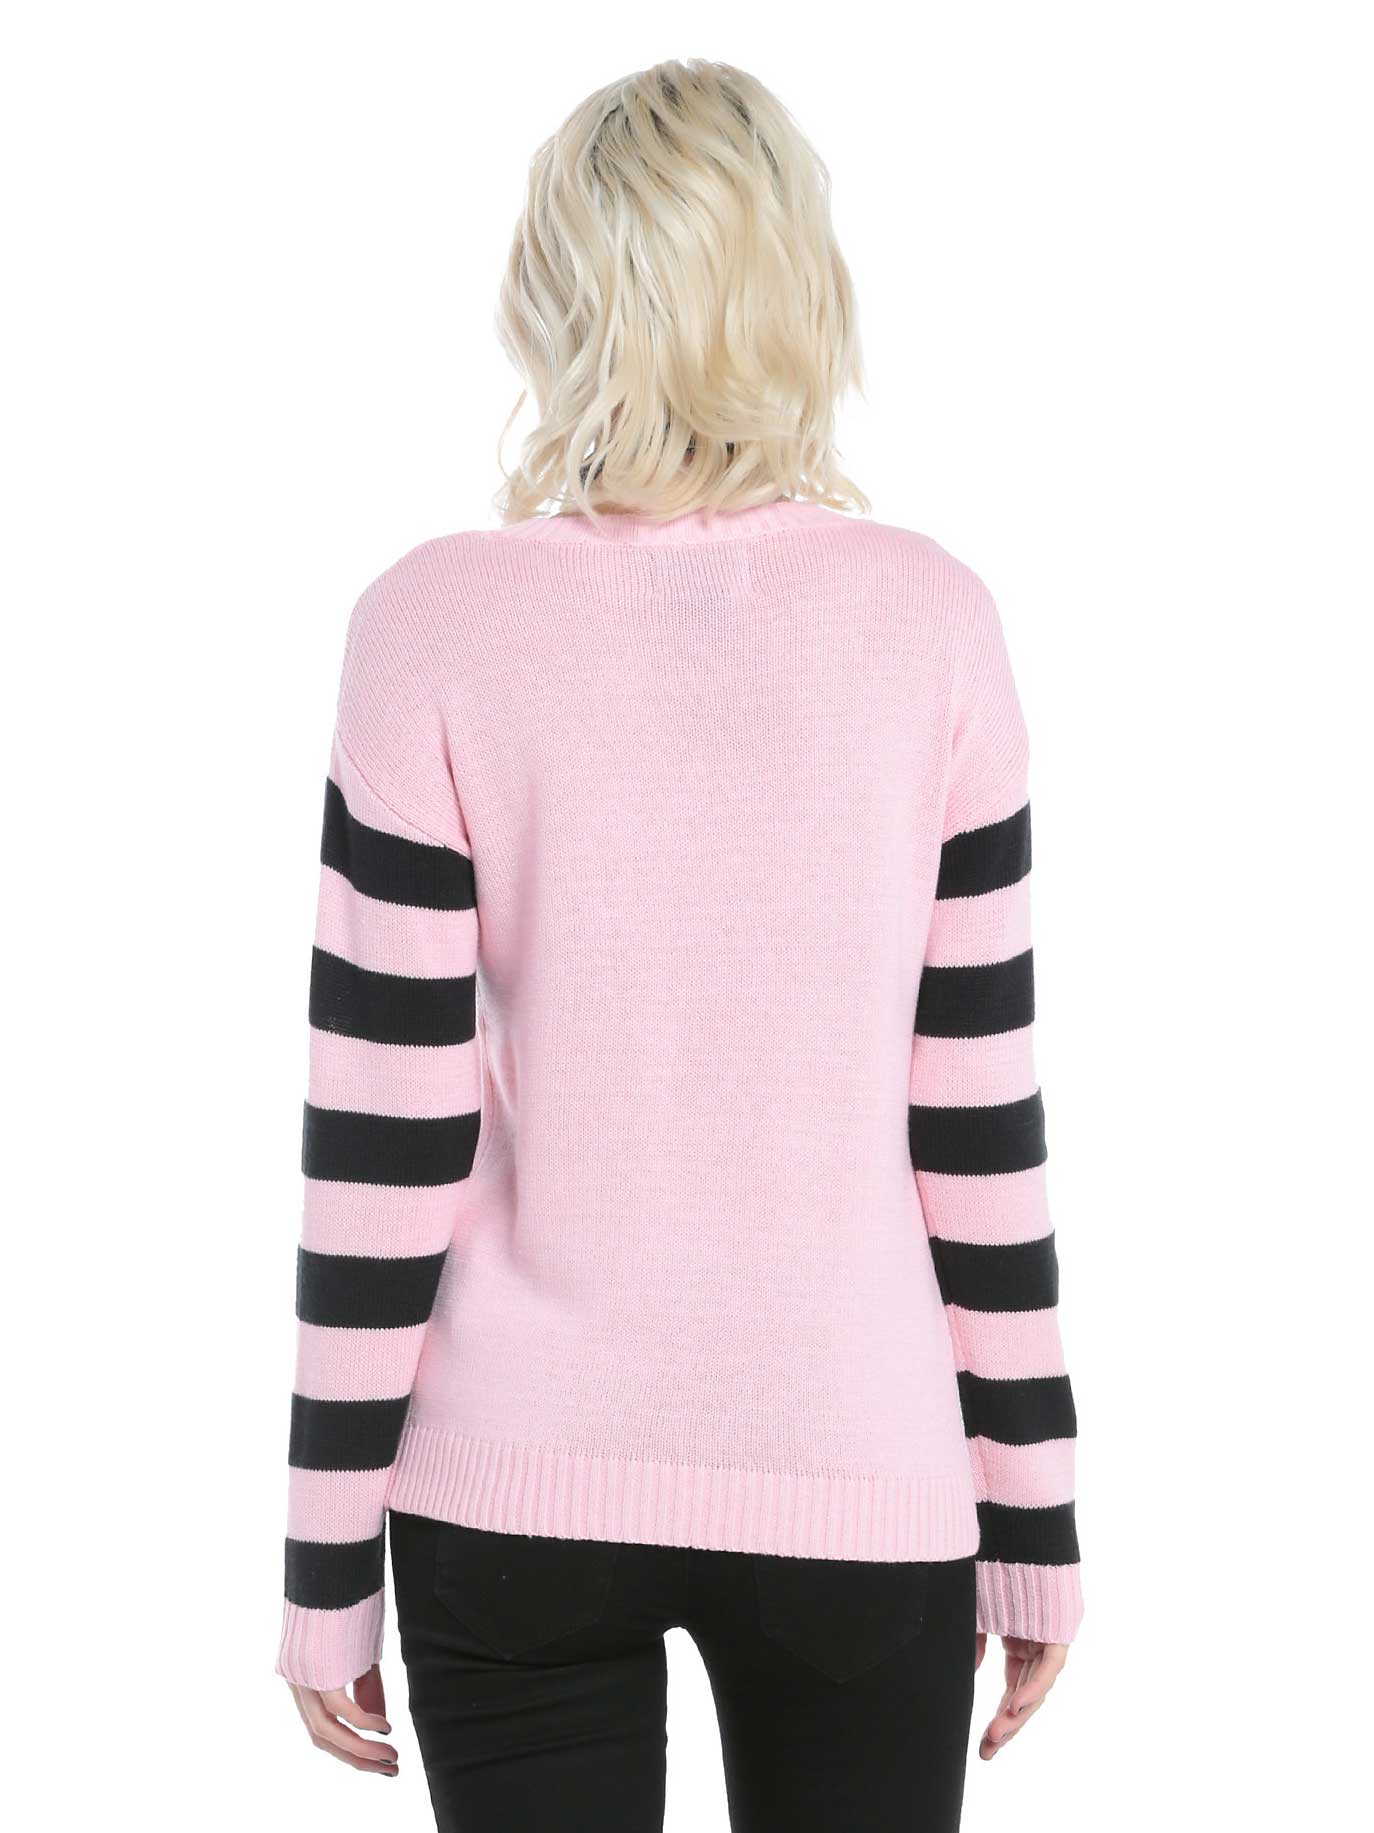 Pink and Black sweater